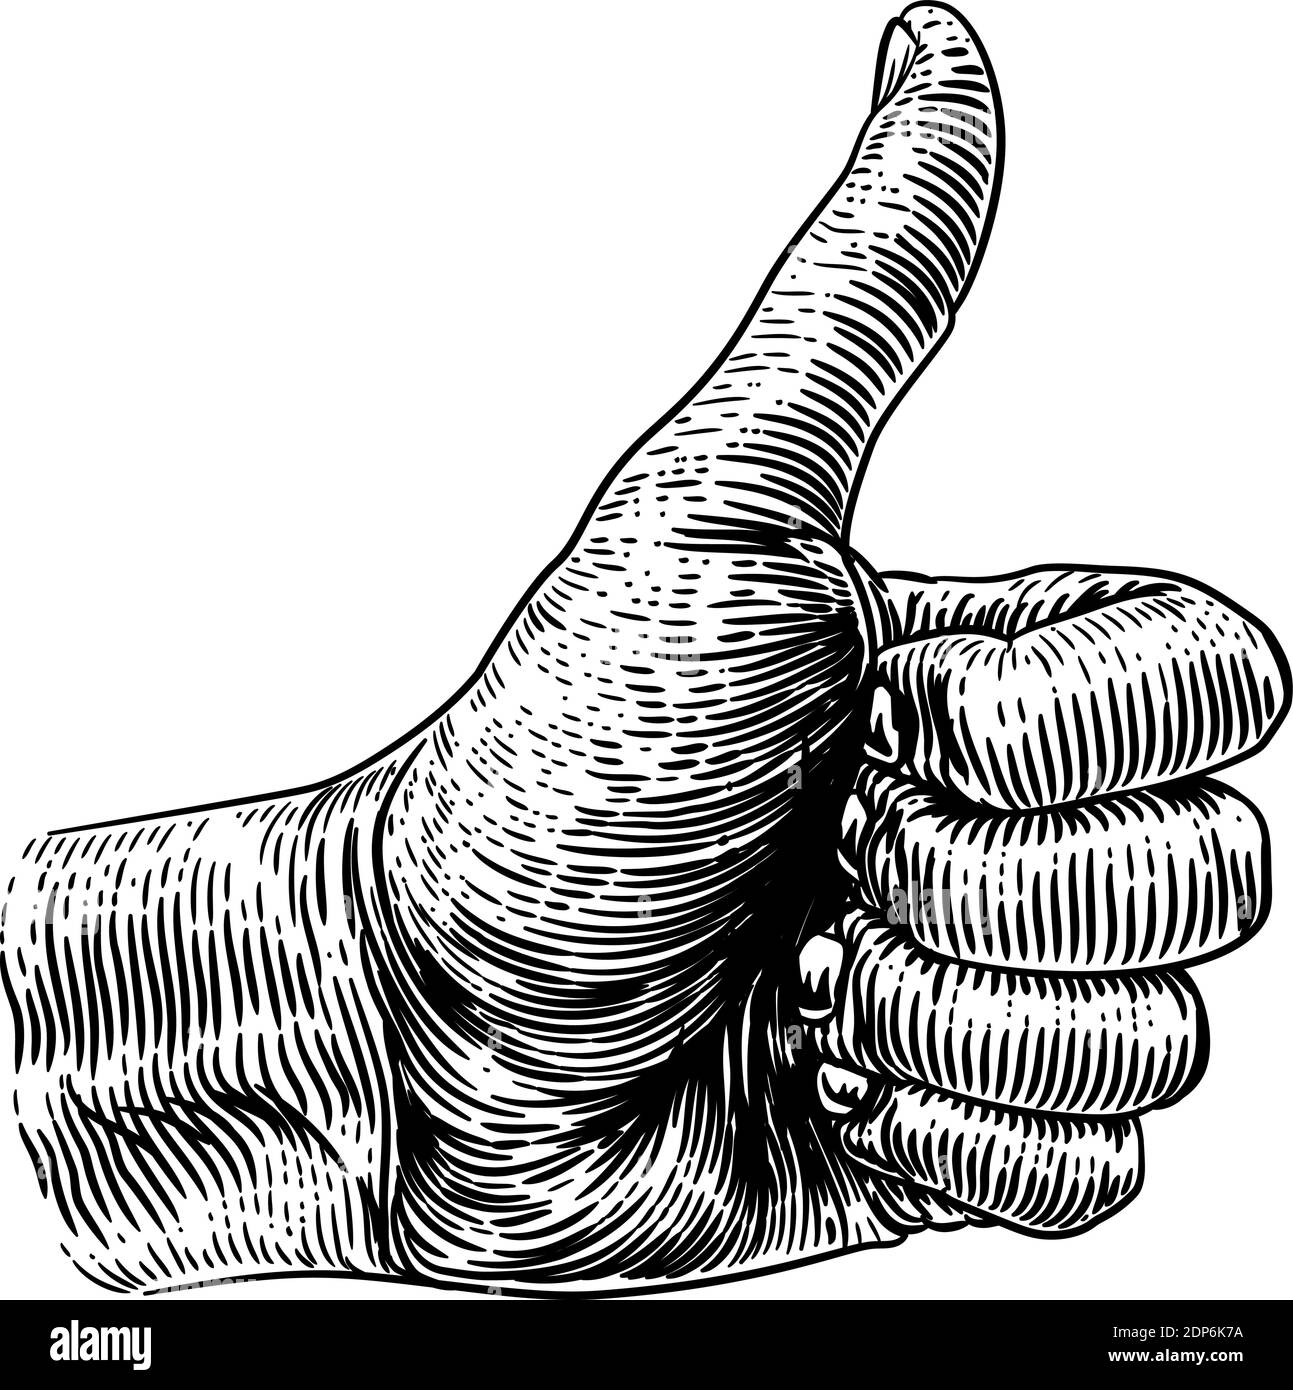 Thumb Up Hand Sign Retro Vintage Woodcut Stock Vector